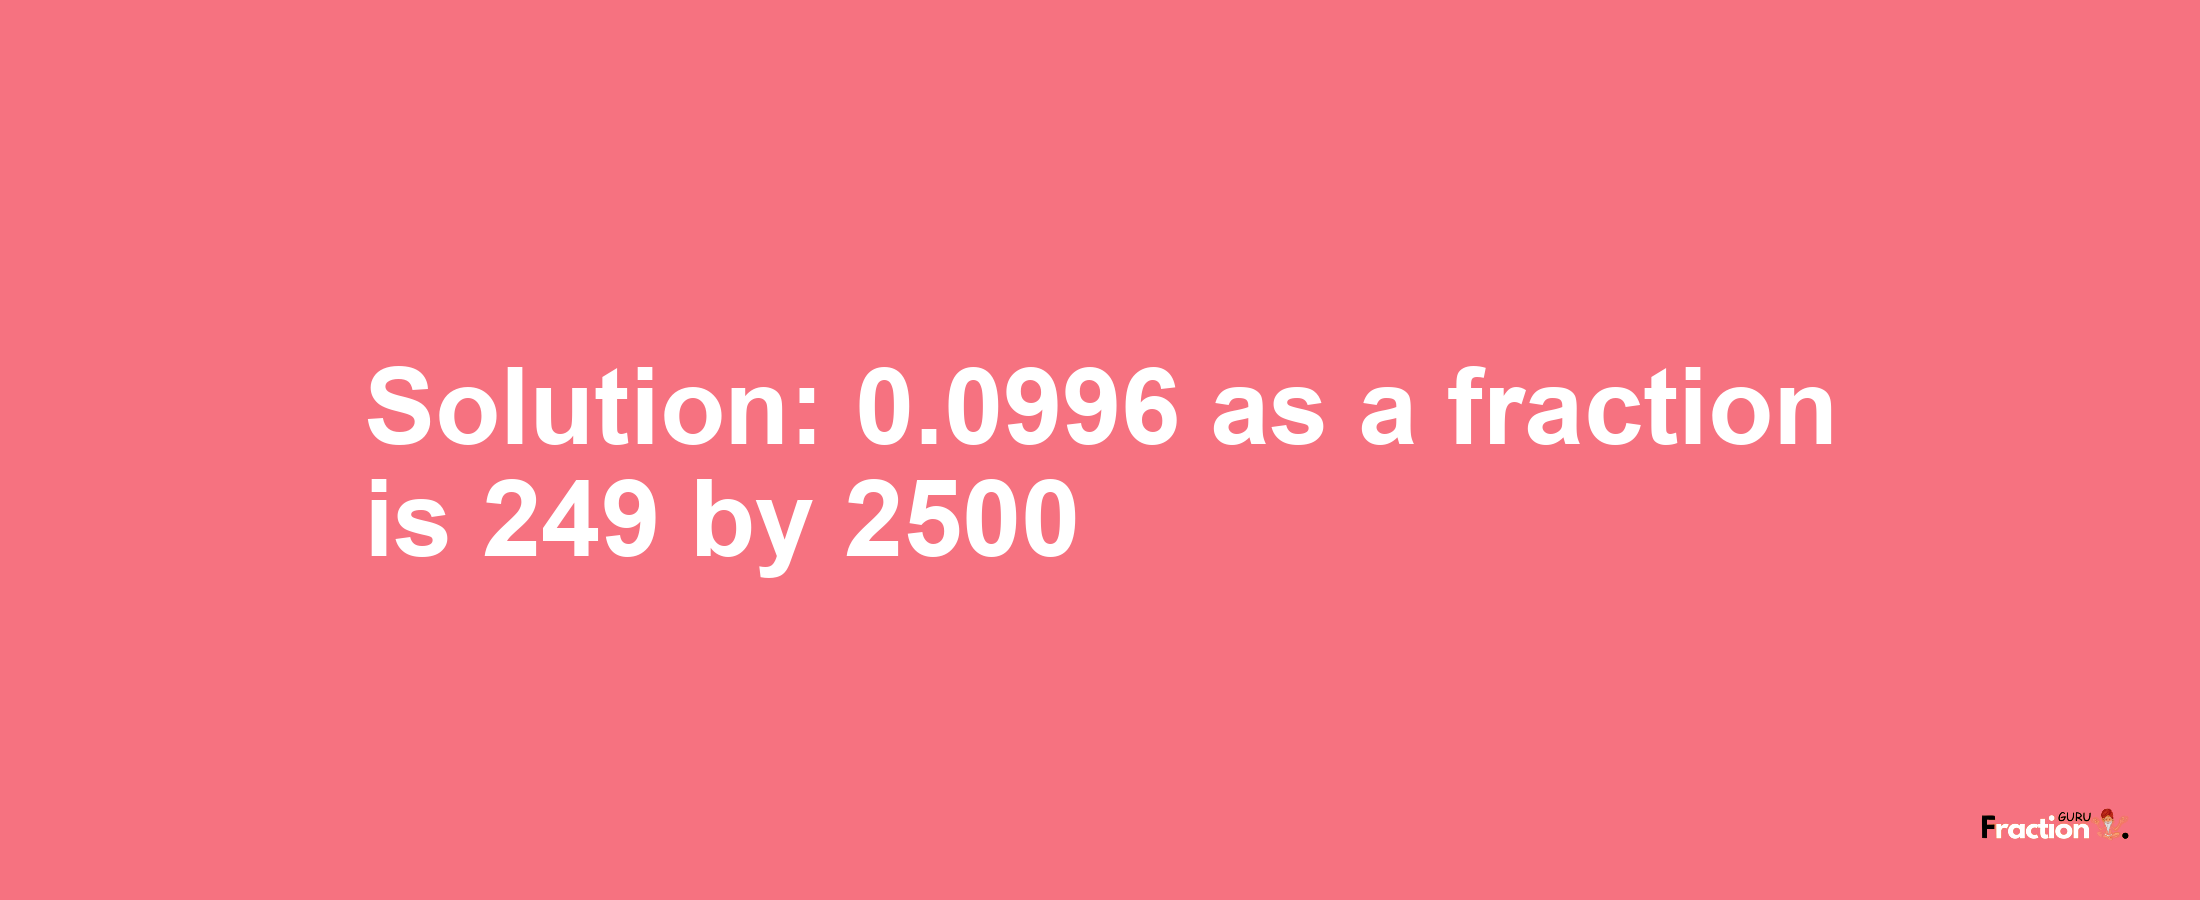 Solution:0.0996 as a fraction is 249/2500